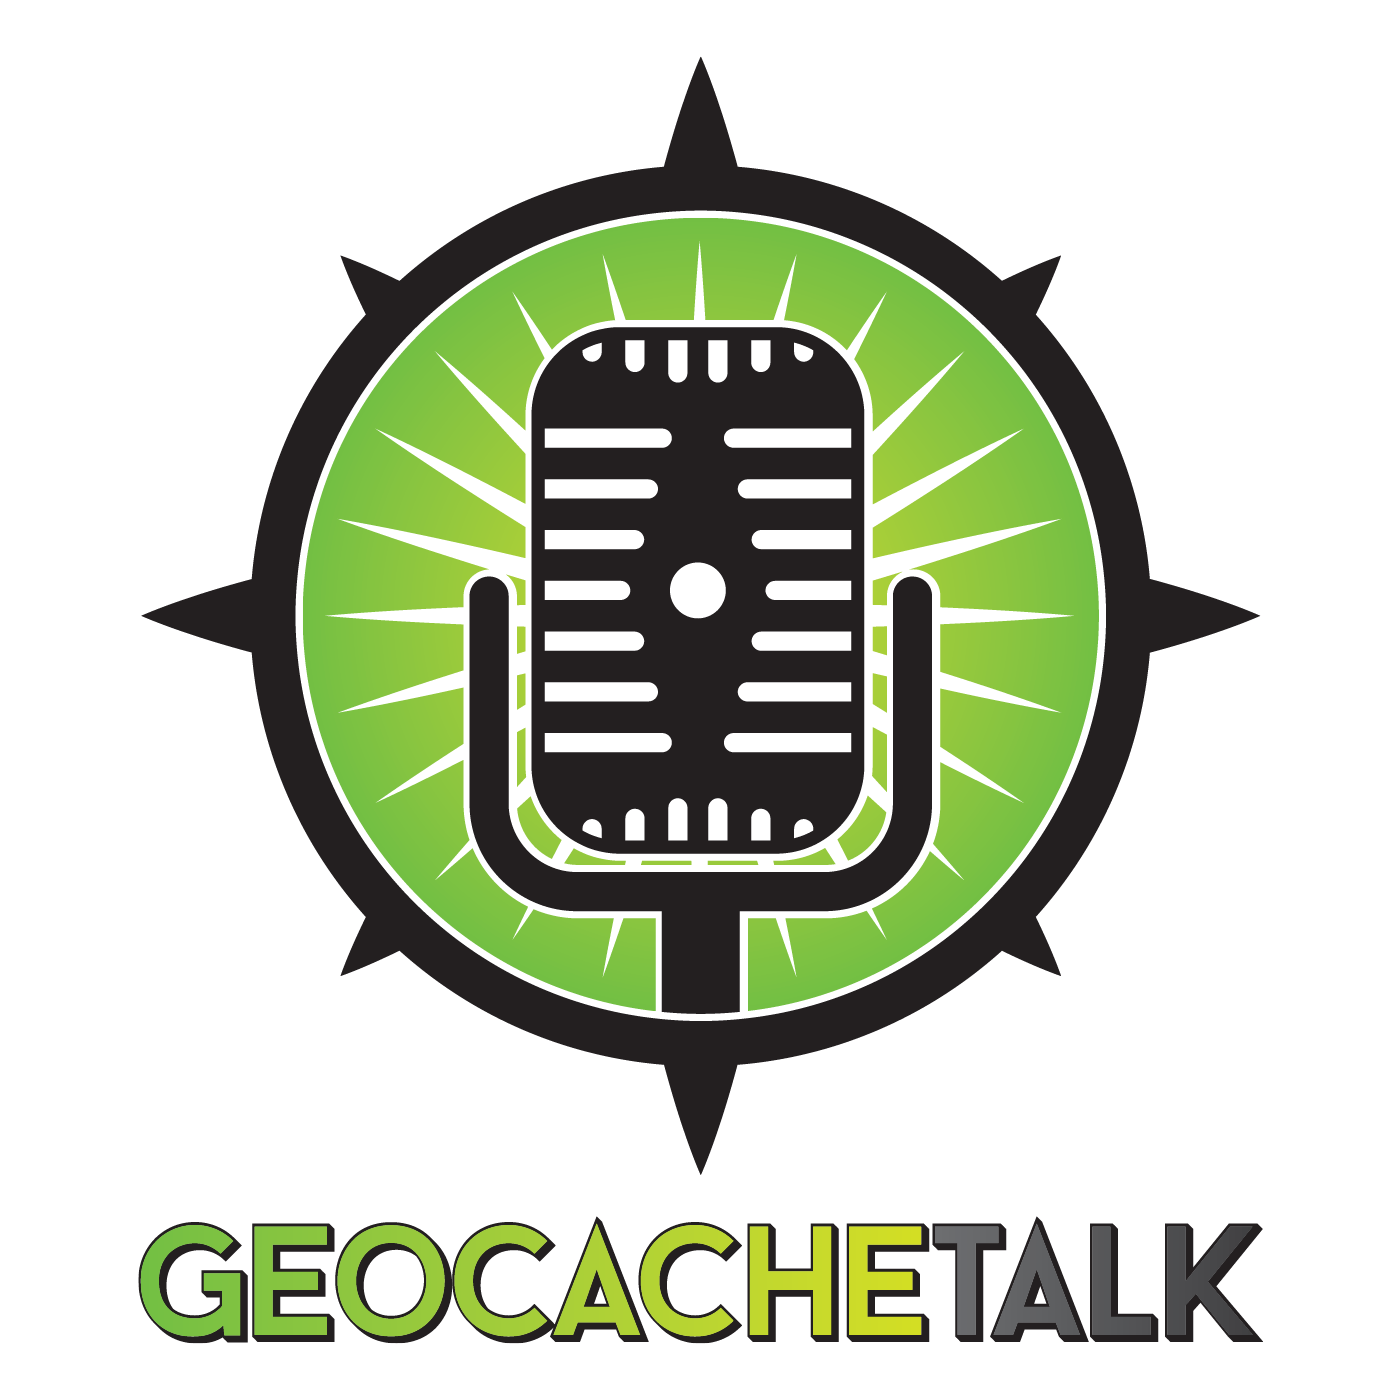 Show 92 Doug Macrae - Geocaching on a 7th Continent